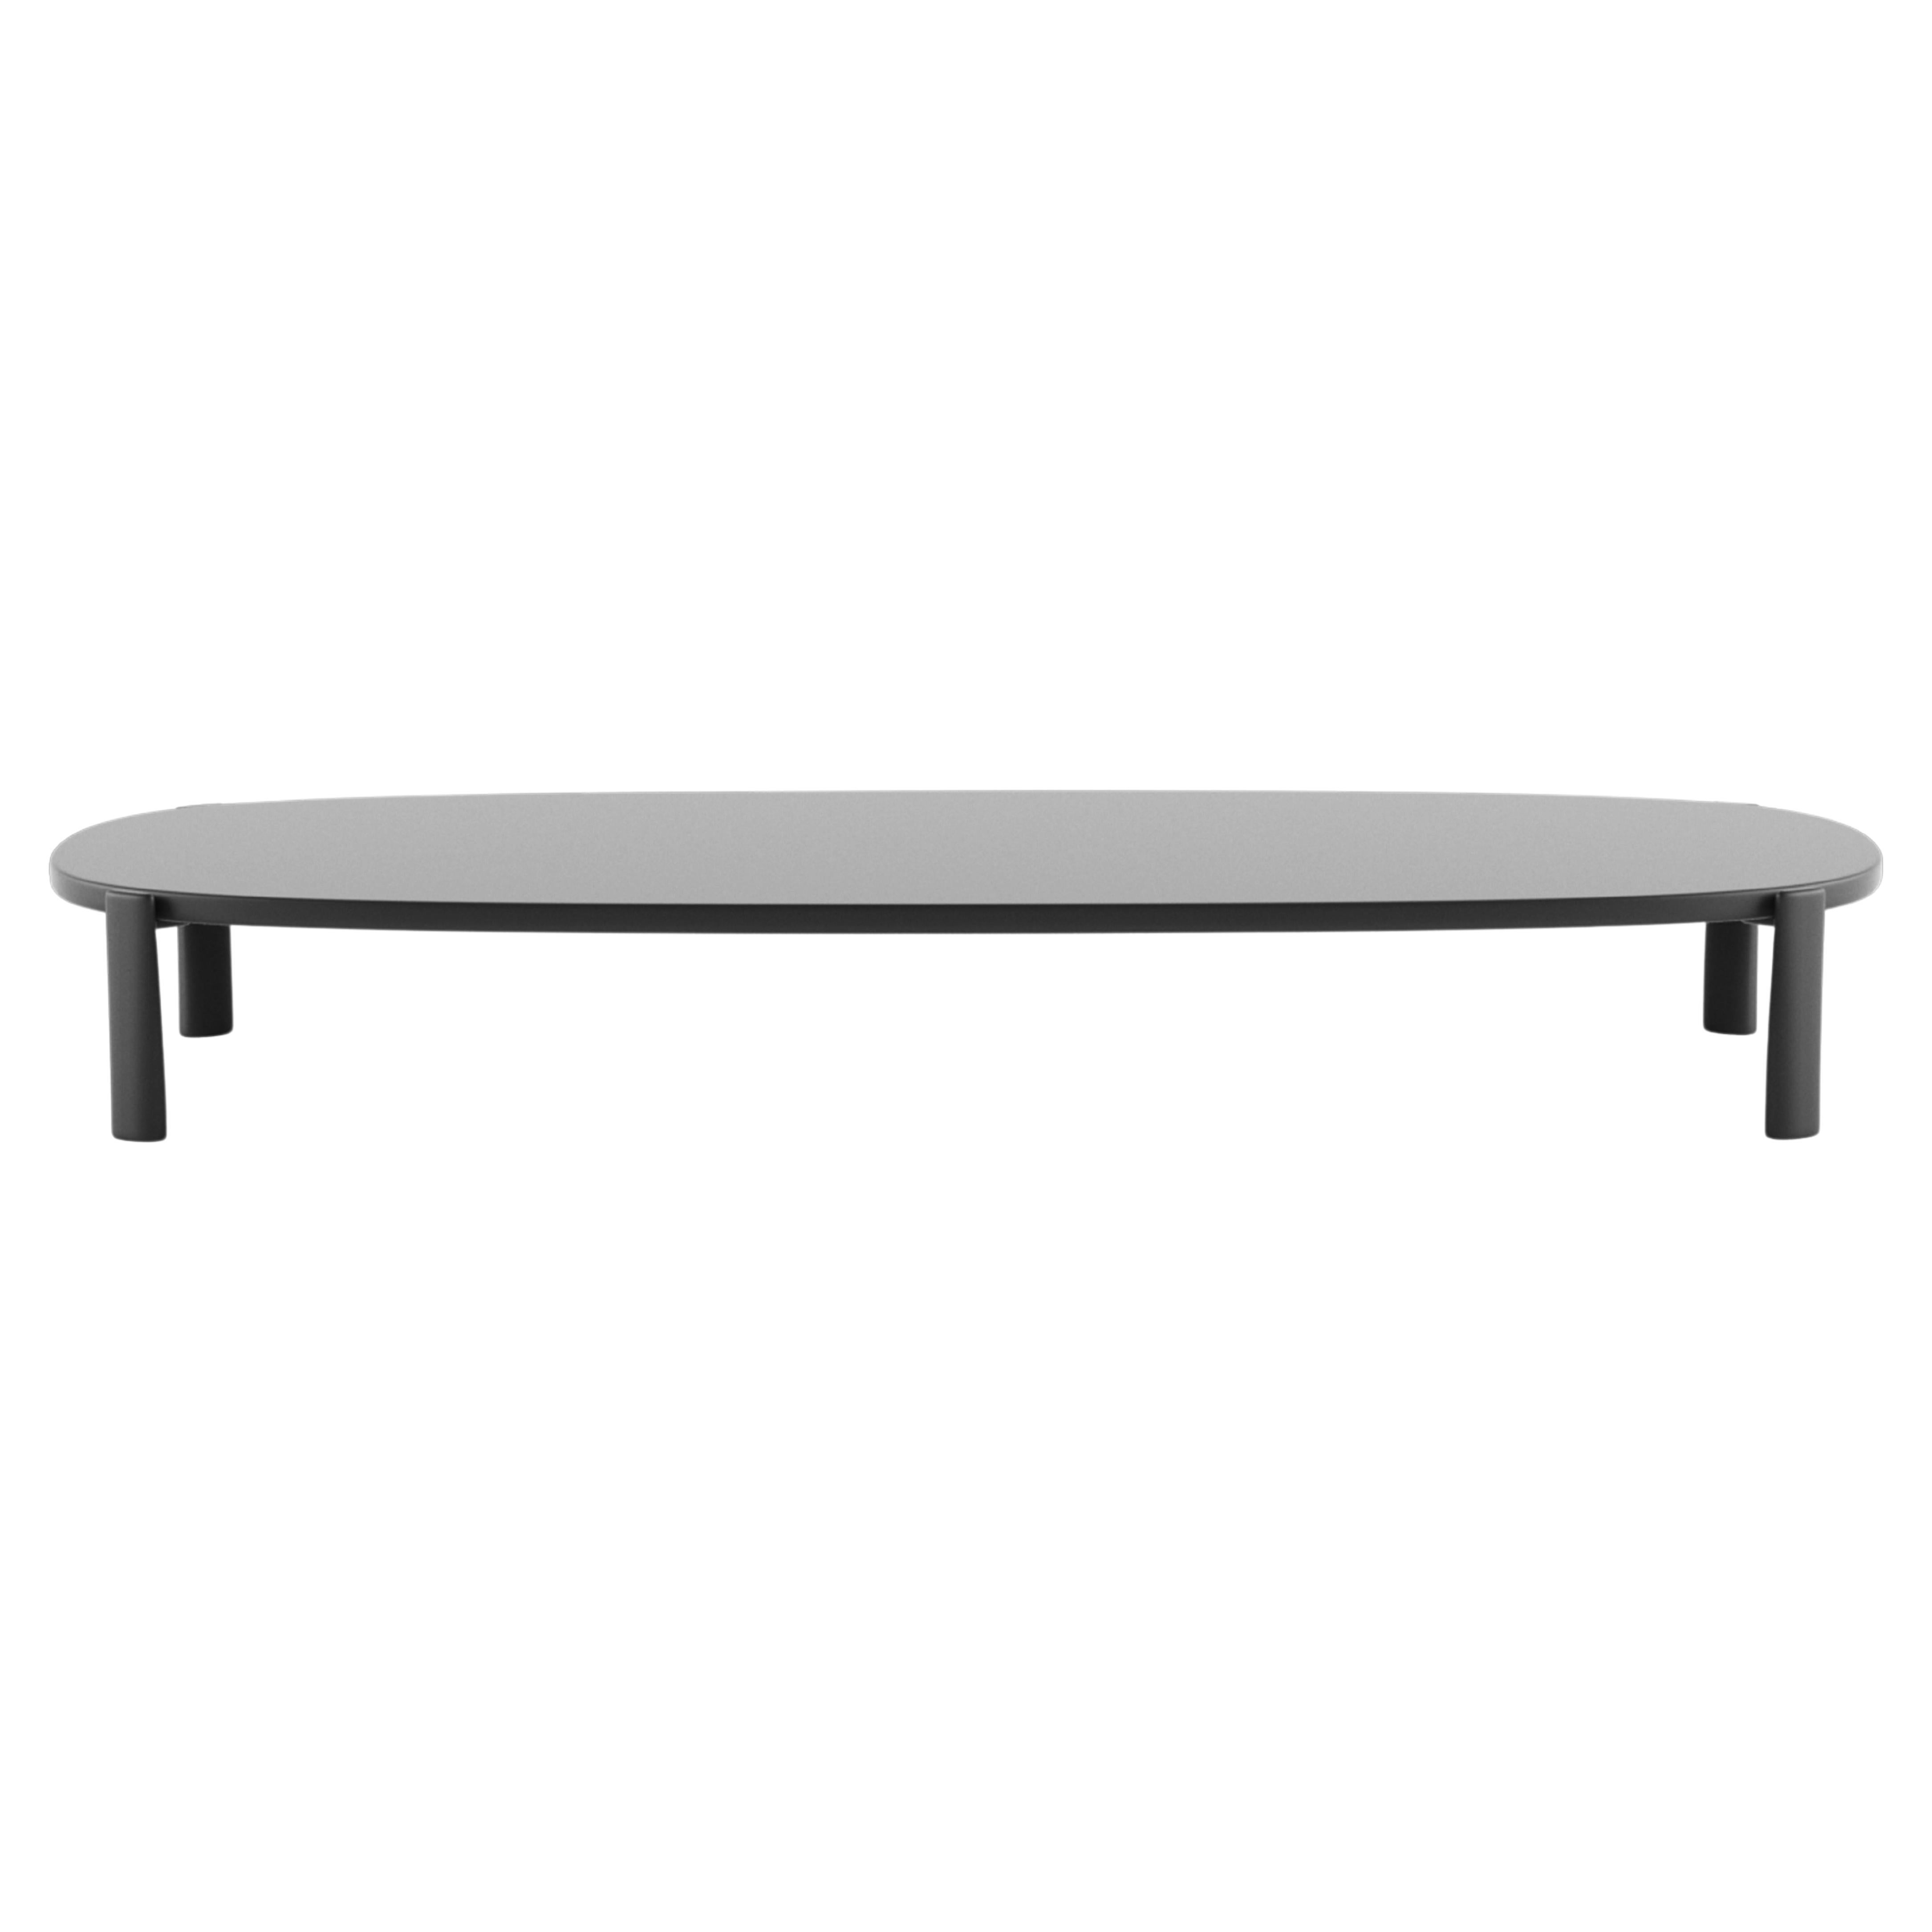 Alias T10_O Ten Outdoor Table 120x60 in Grey Ceramic Top with Lacquered Frame For Sale